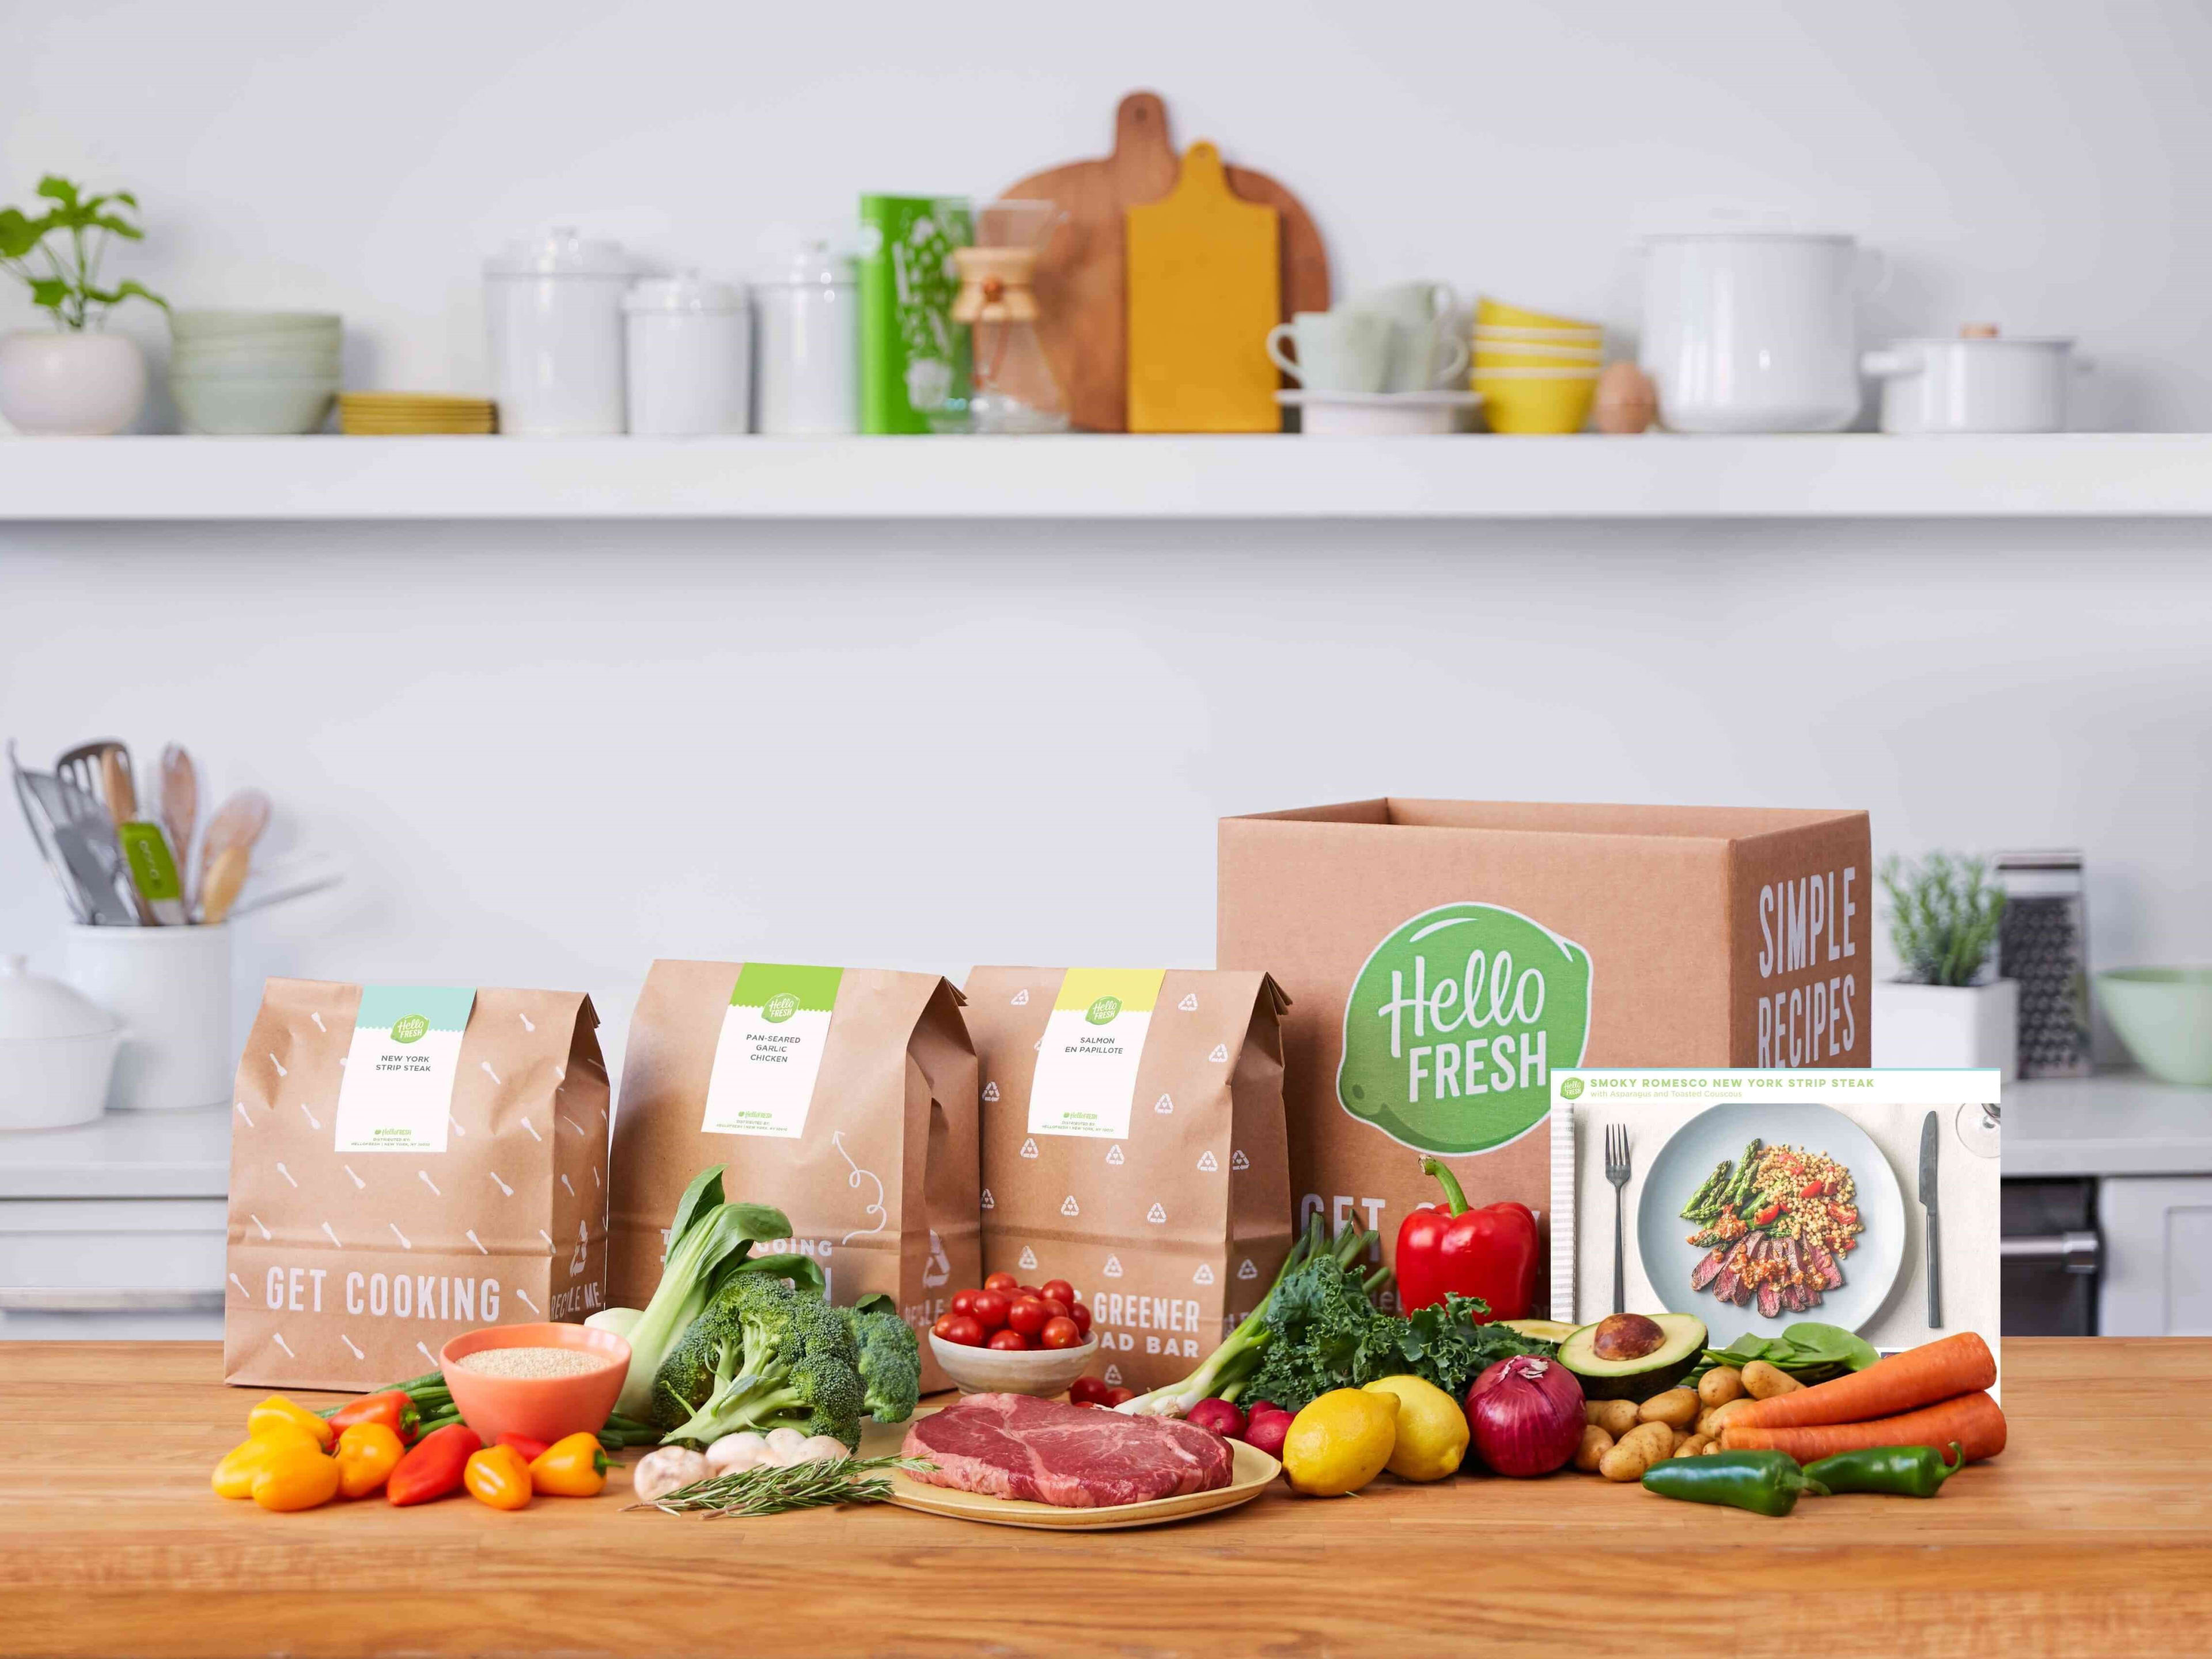 Gourmet meals delivered by HelloFresh and made by you